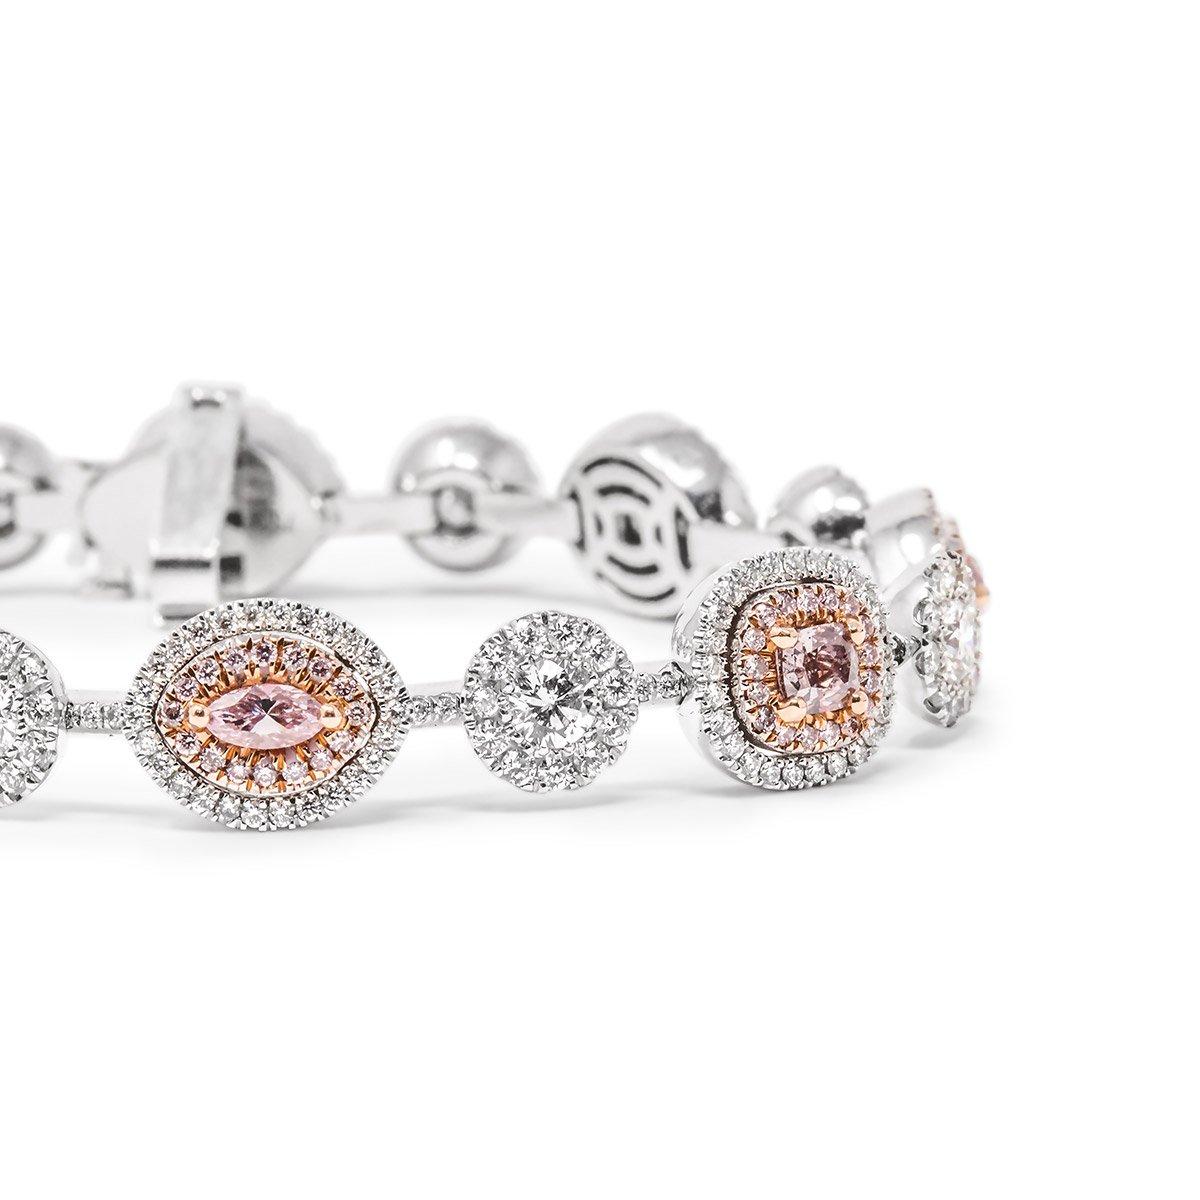 This diamond bracelet hosts 8 Fancy Pink GIA Certified Diamonds and 8 White Diamonds which are each accented by a diamond halo of round brilliant cut diamonds. This bracelet is 7.06